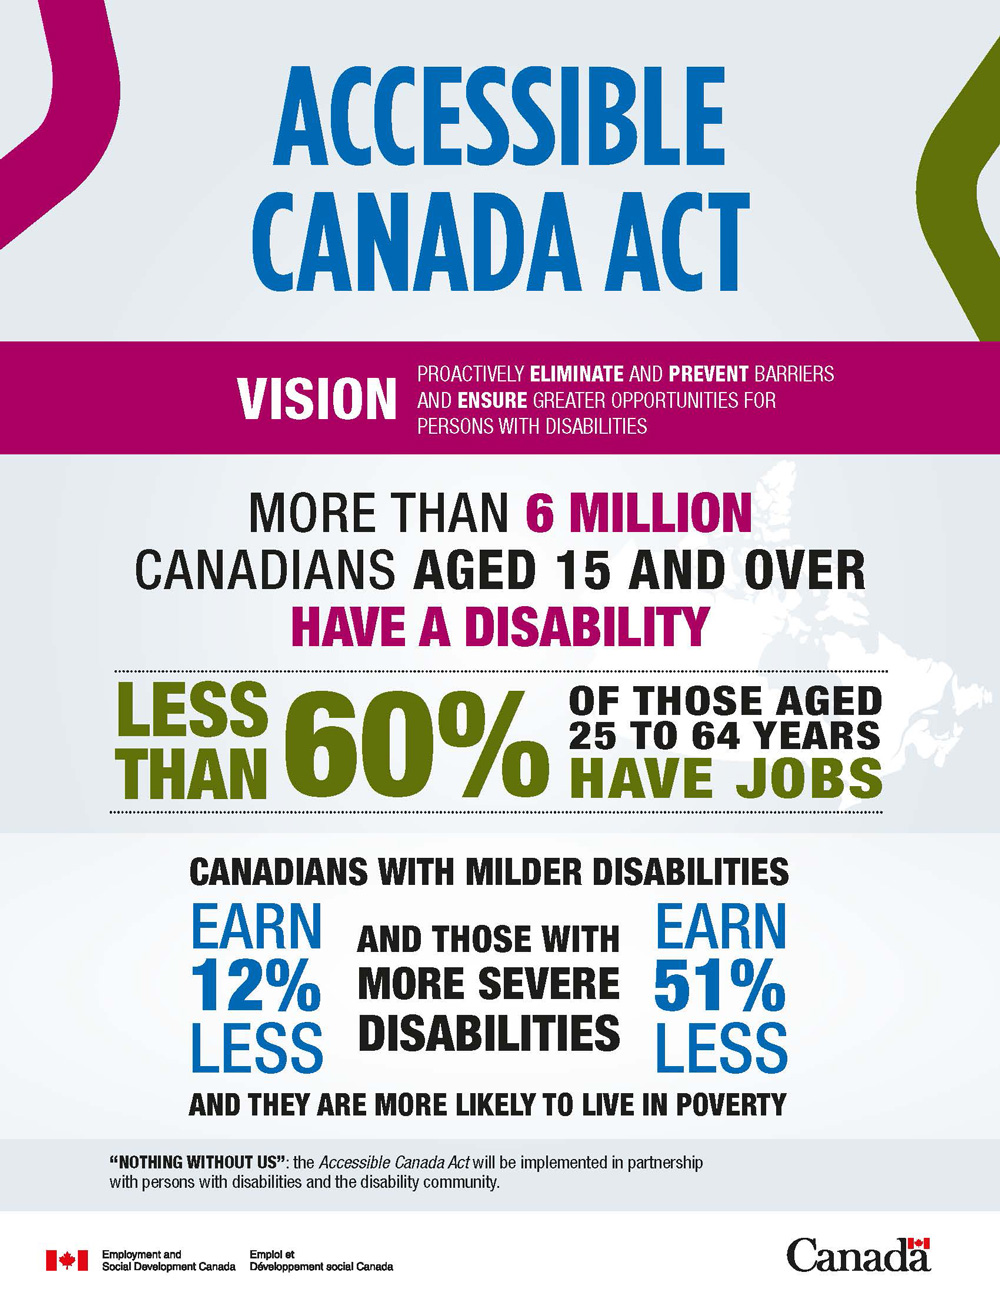 Promotional poster for the Accessible Canada Act 